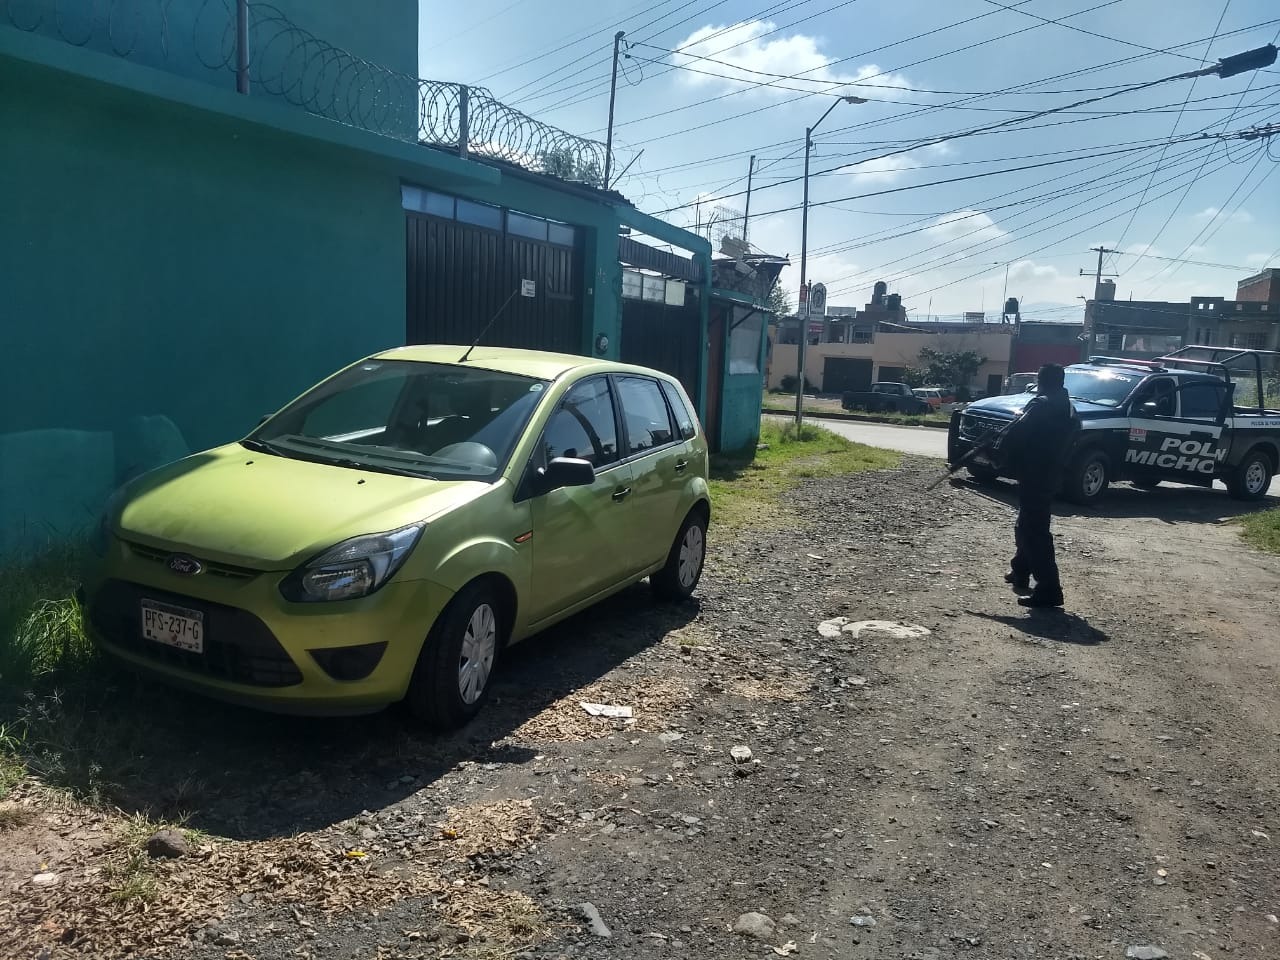 Failed to steal baby vehicle inside by security cameras in Morelia, Michoacán